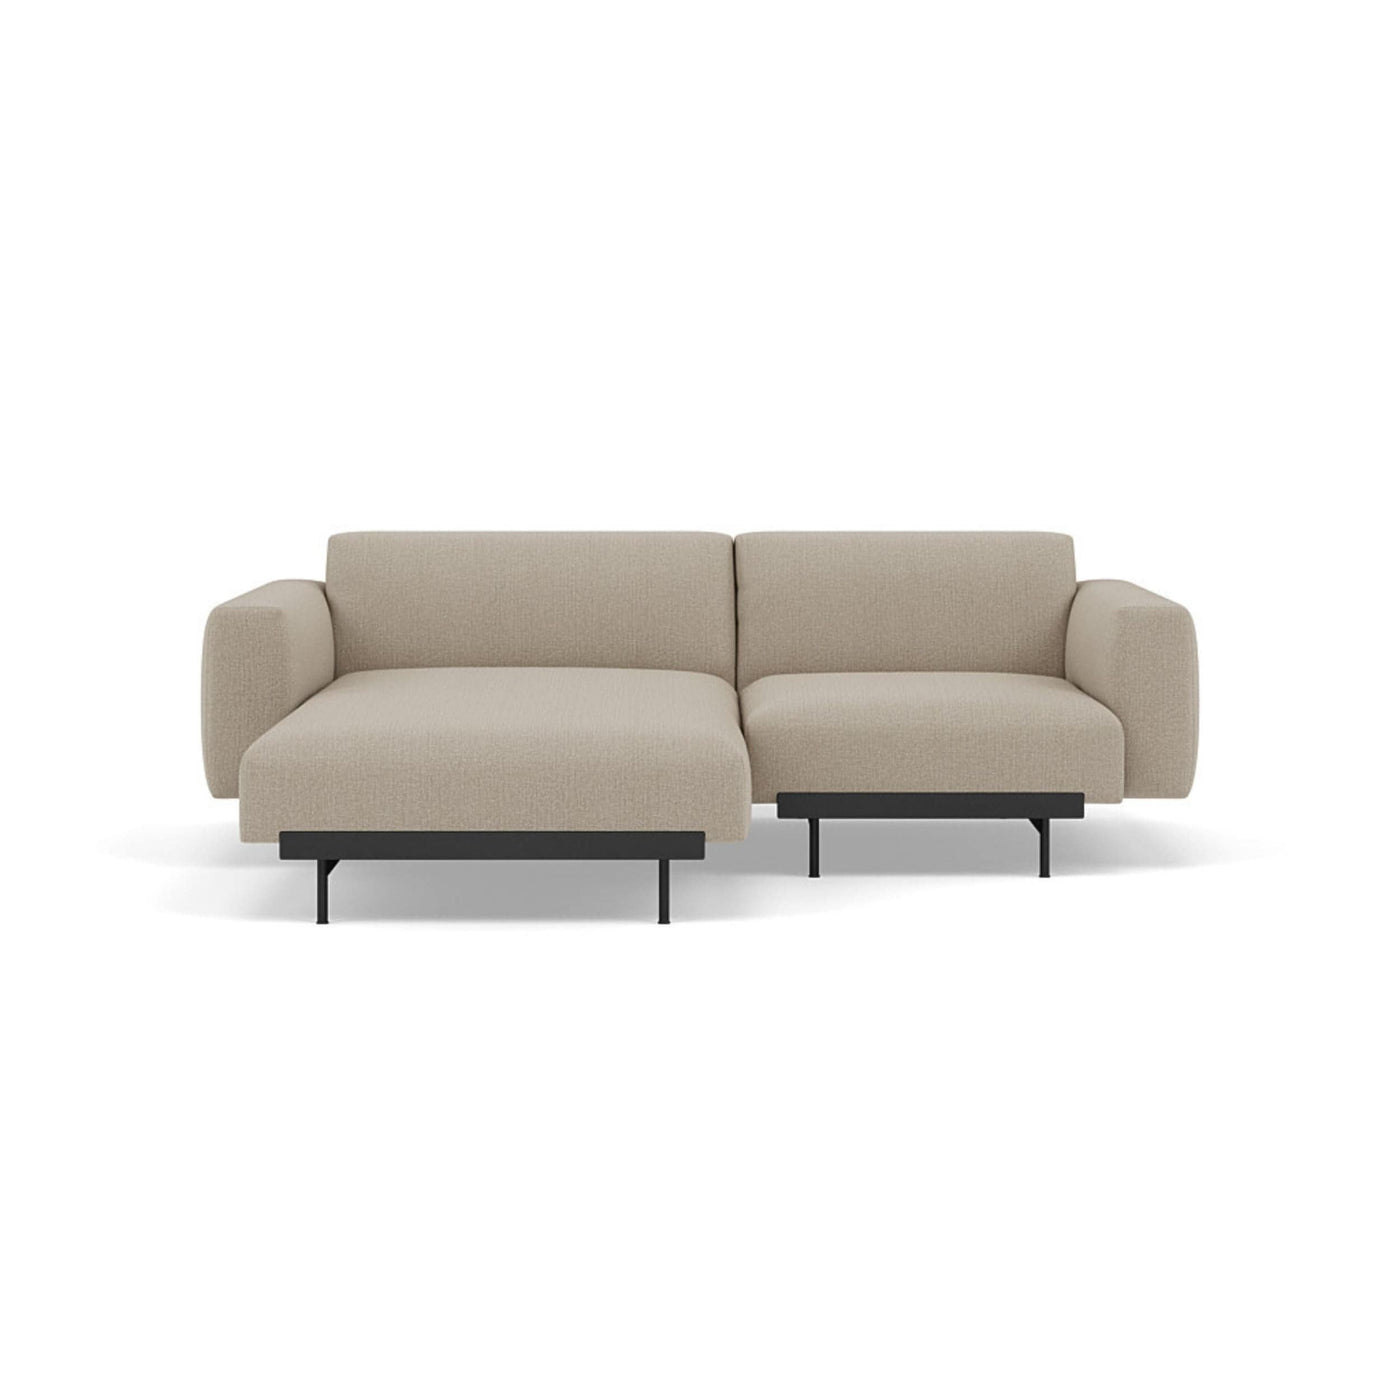 Muuto In Situ Modular 2 Seater Sofa, configuration 5. Made to order from someday designs #colour_clay-10